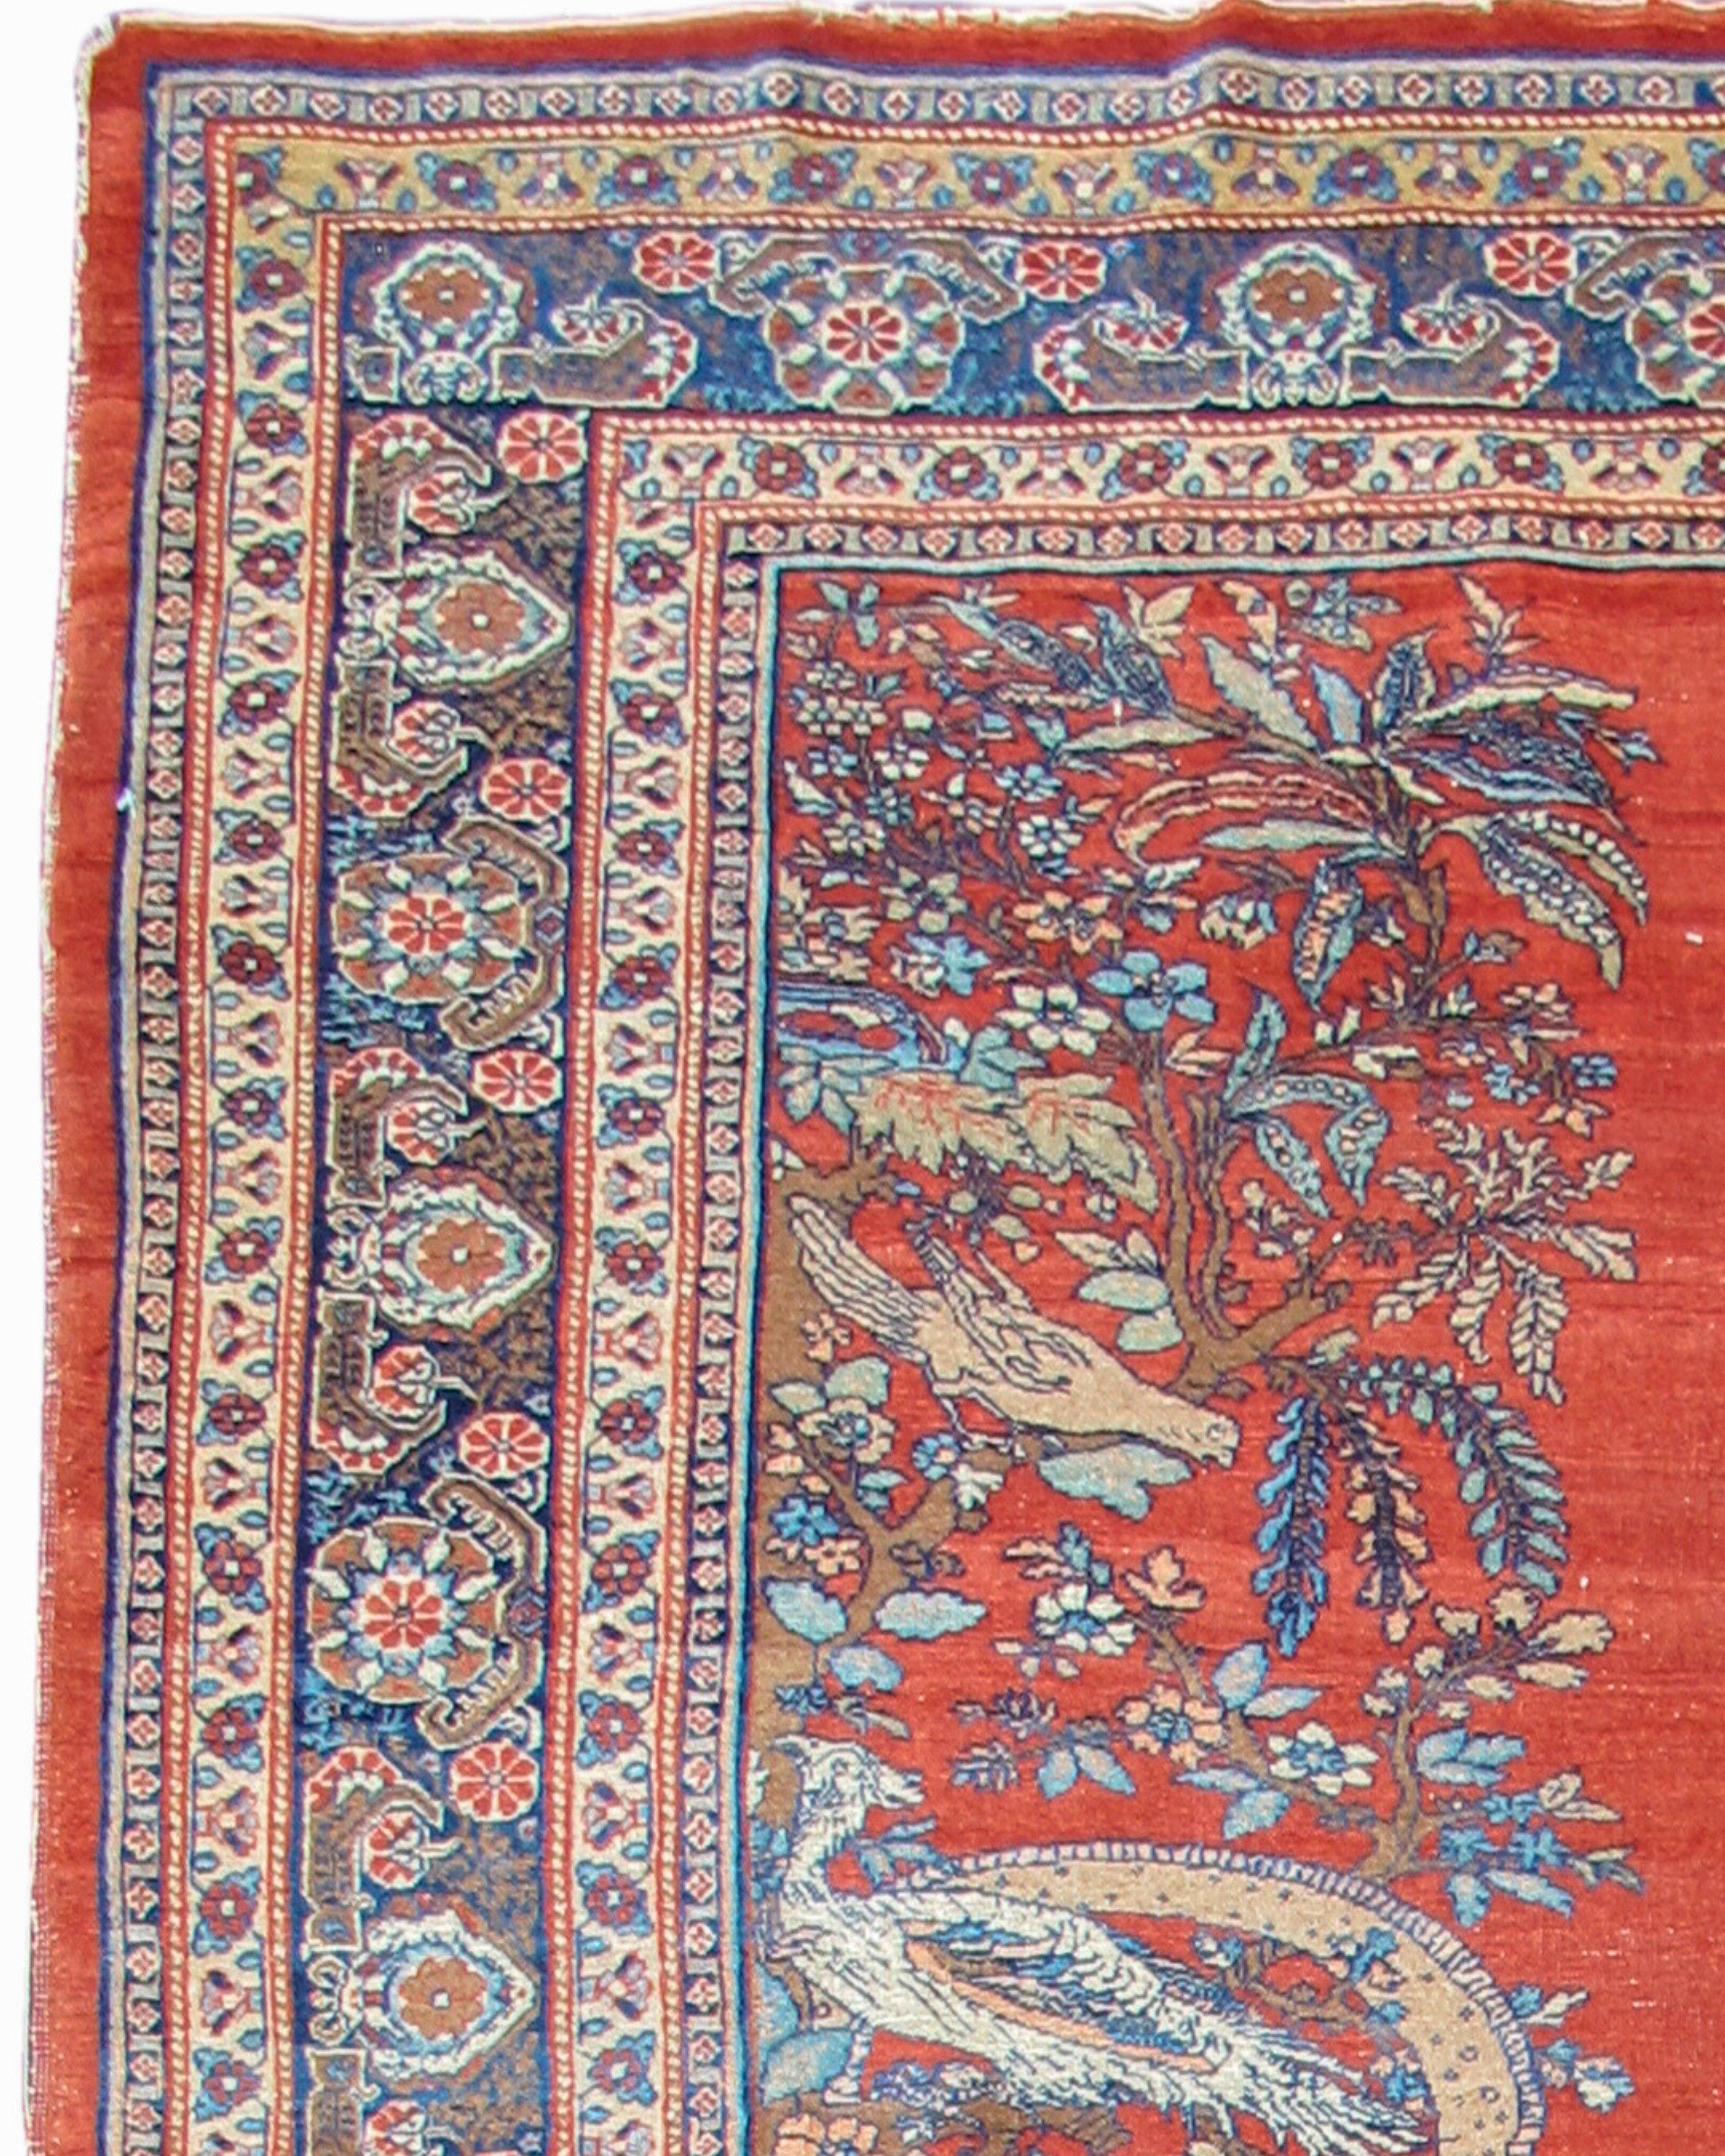 Hand-Woven Antique Persian Tabriz Rug, 19th Century For Sale